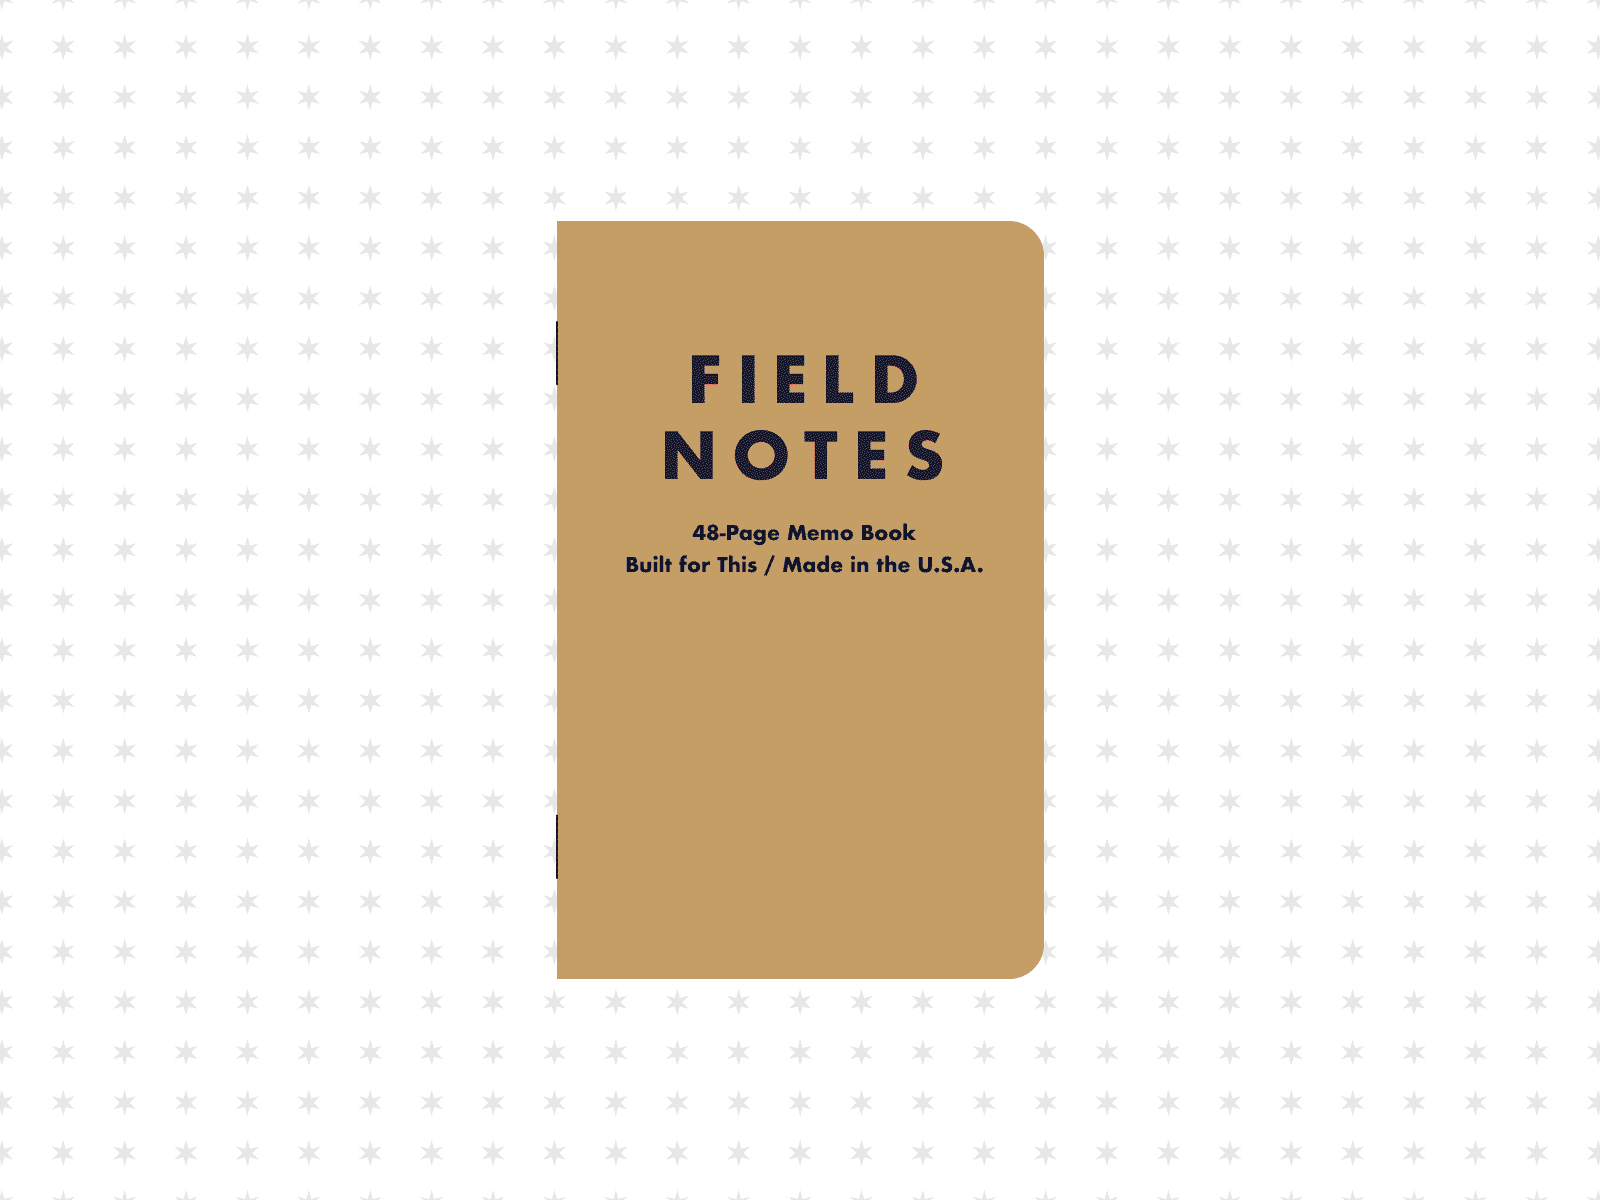 FIELD NOTES Transformation branding concept cover custom design field notes fields football illustration type typography